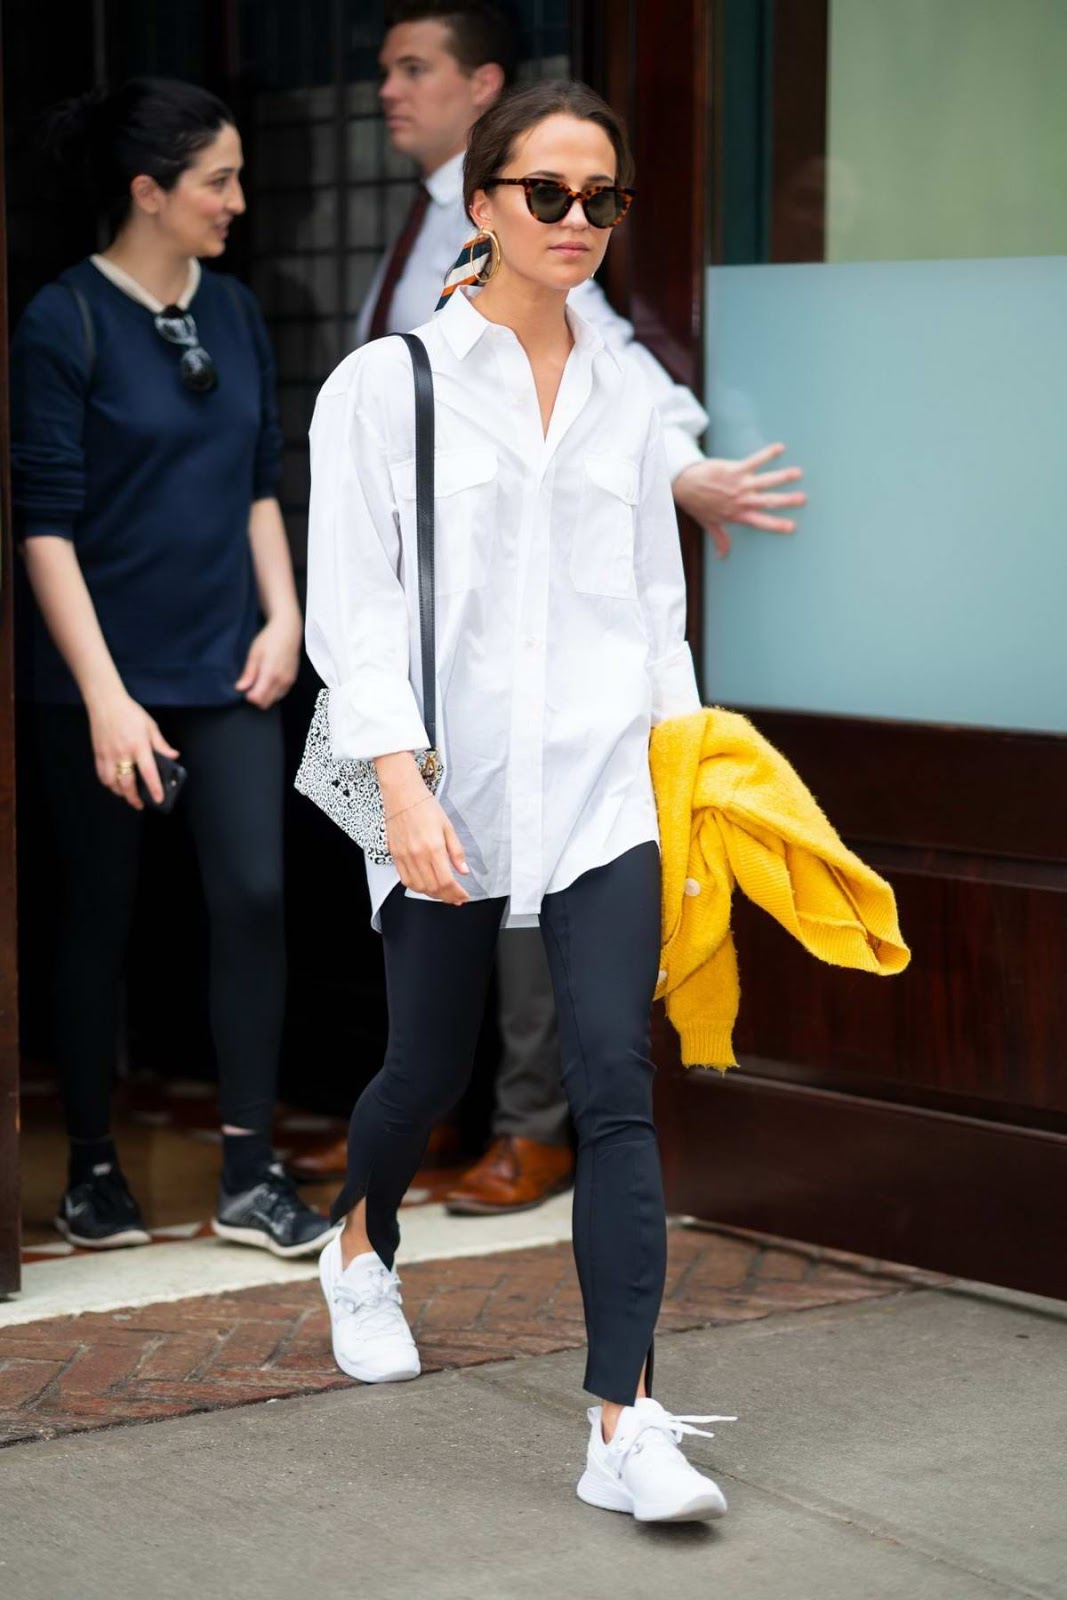 Alicia Vikander in White Shirt Style Out in New York City